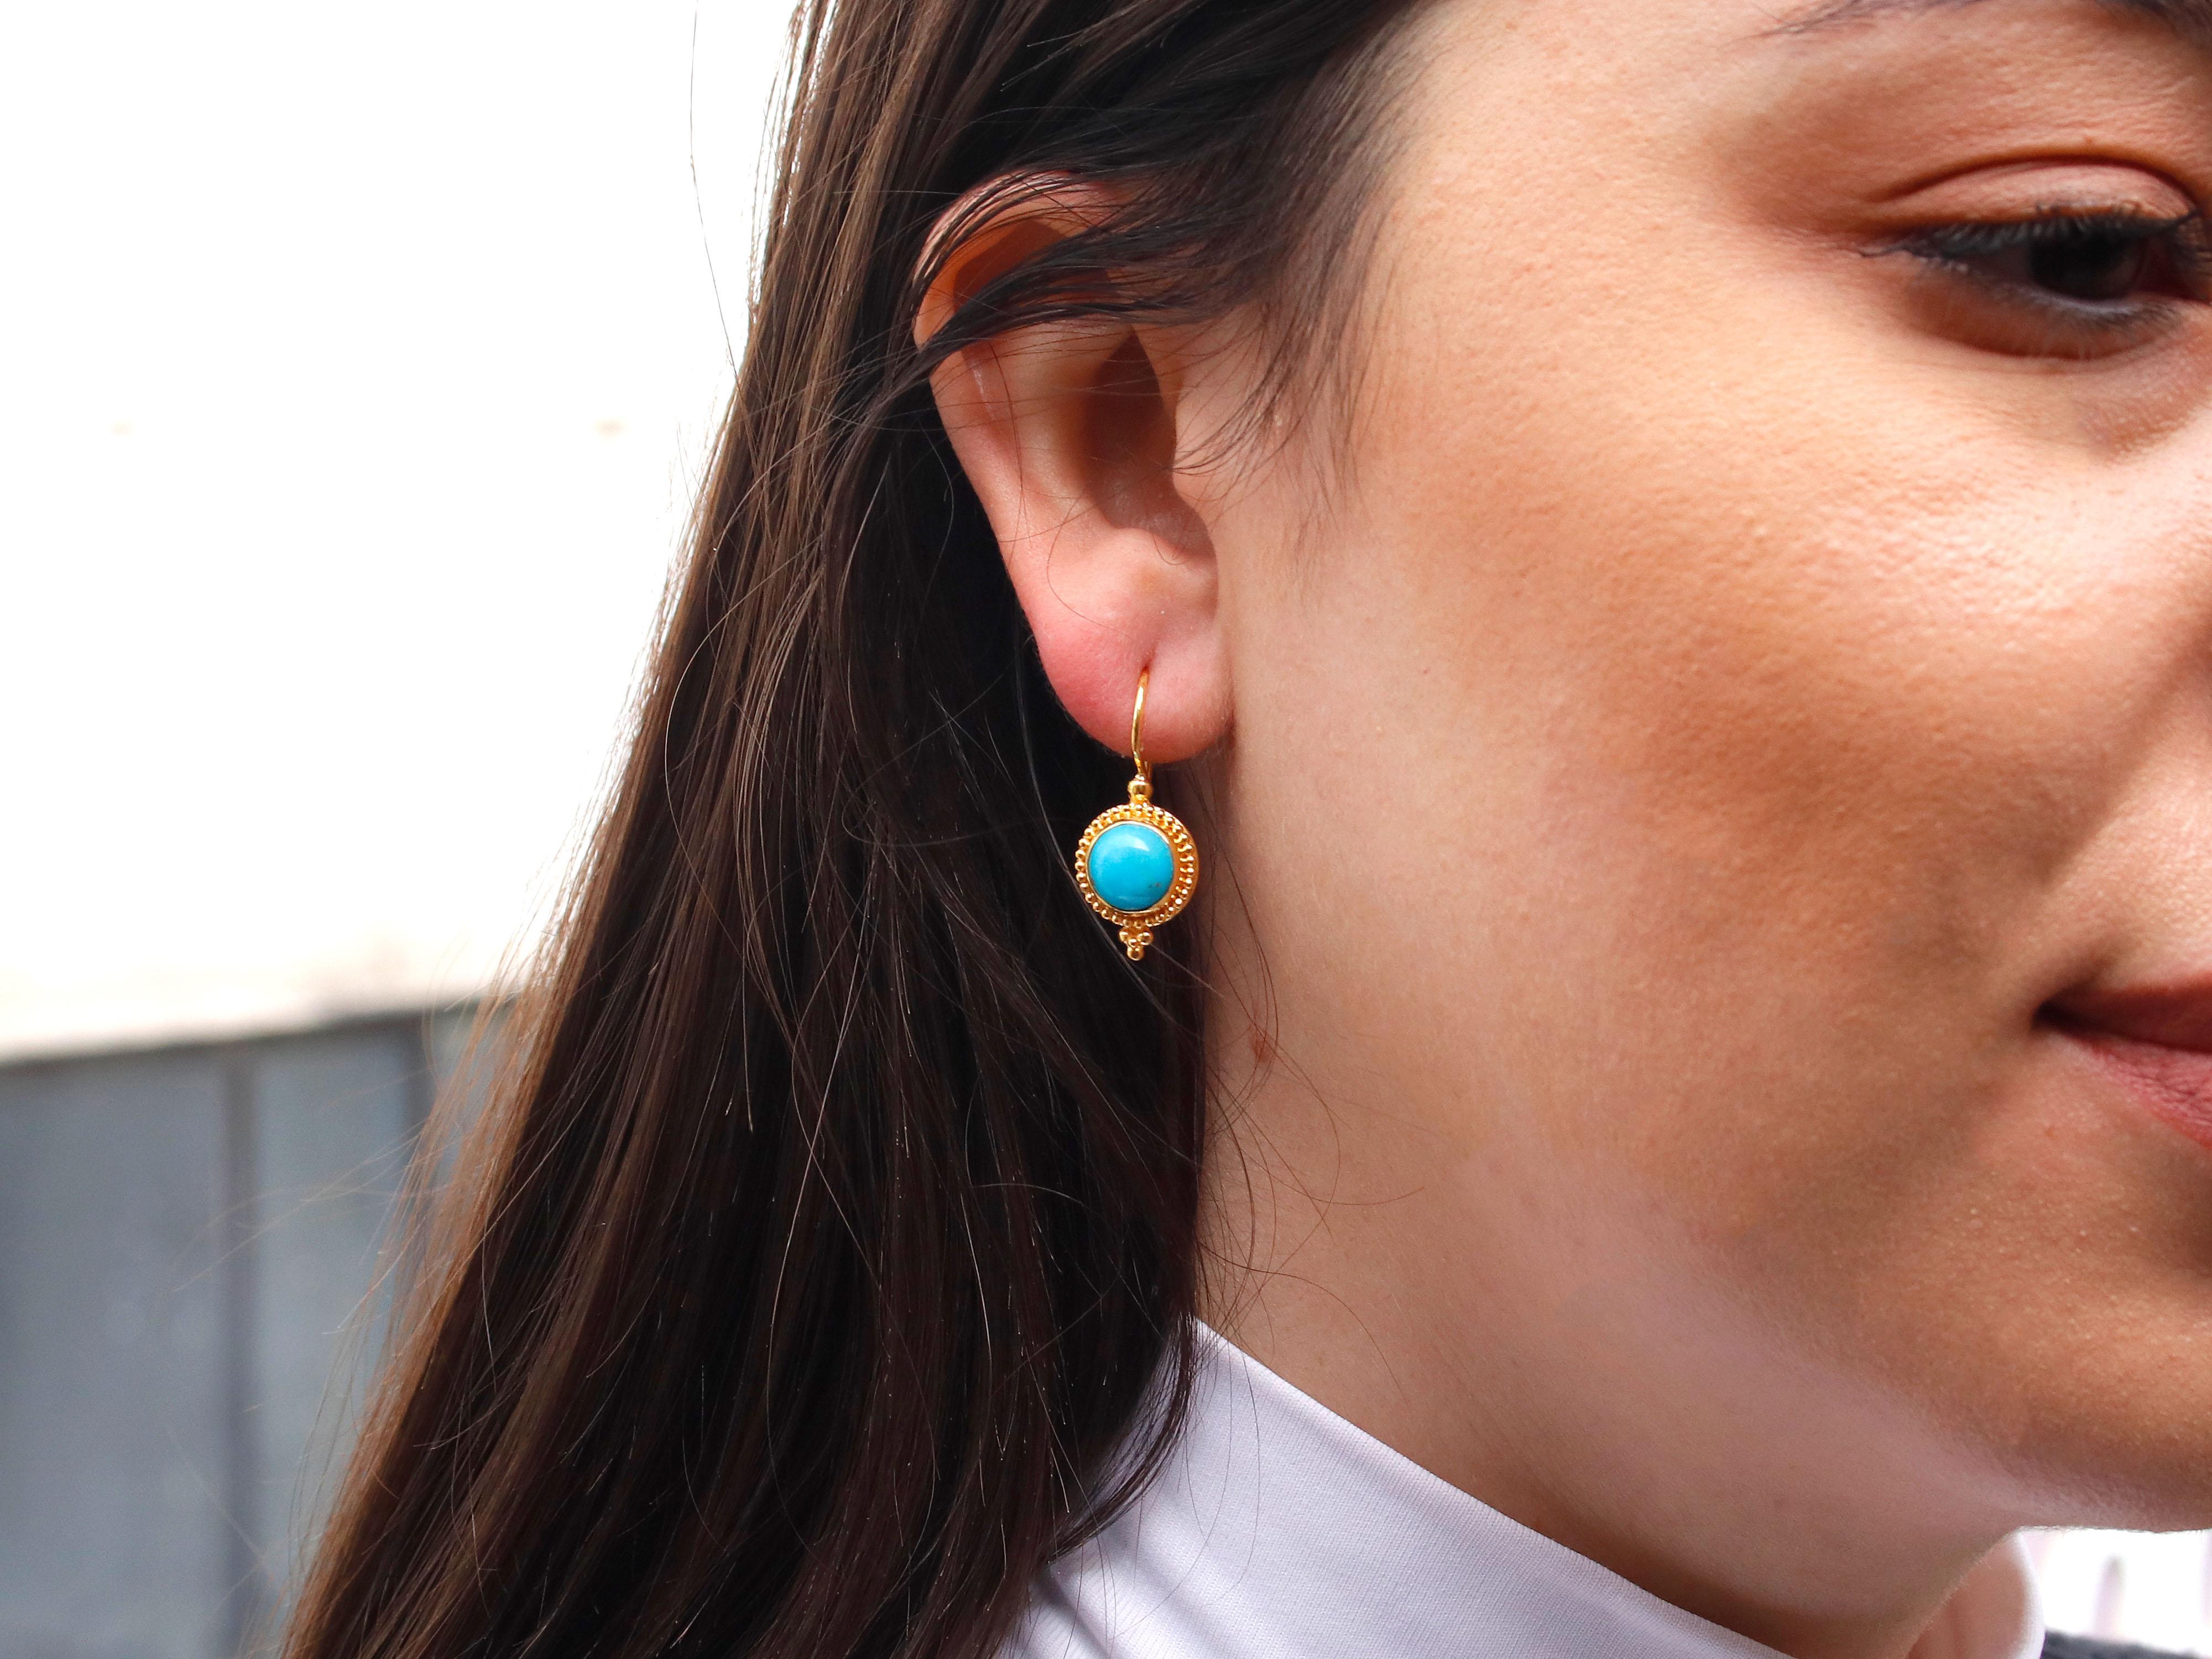 Earrings crafted from 18-karat yellow gold adorned with turquoise and intricate granulation details offer a captivating blend of elegance and artistry. The warmth of the yellow gold beautifully complements the serene hues of turquoise, creating a